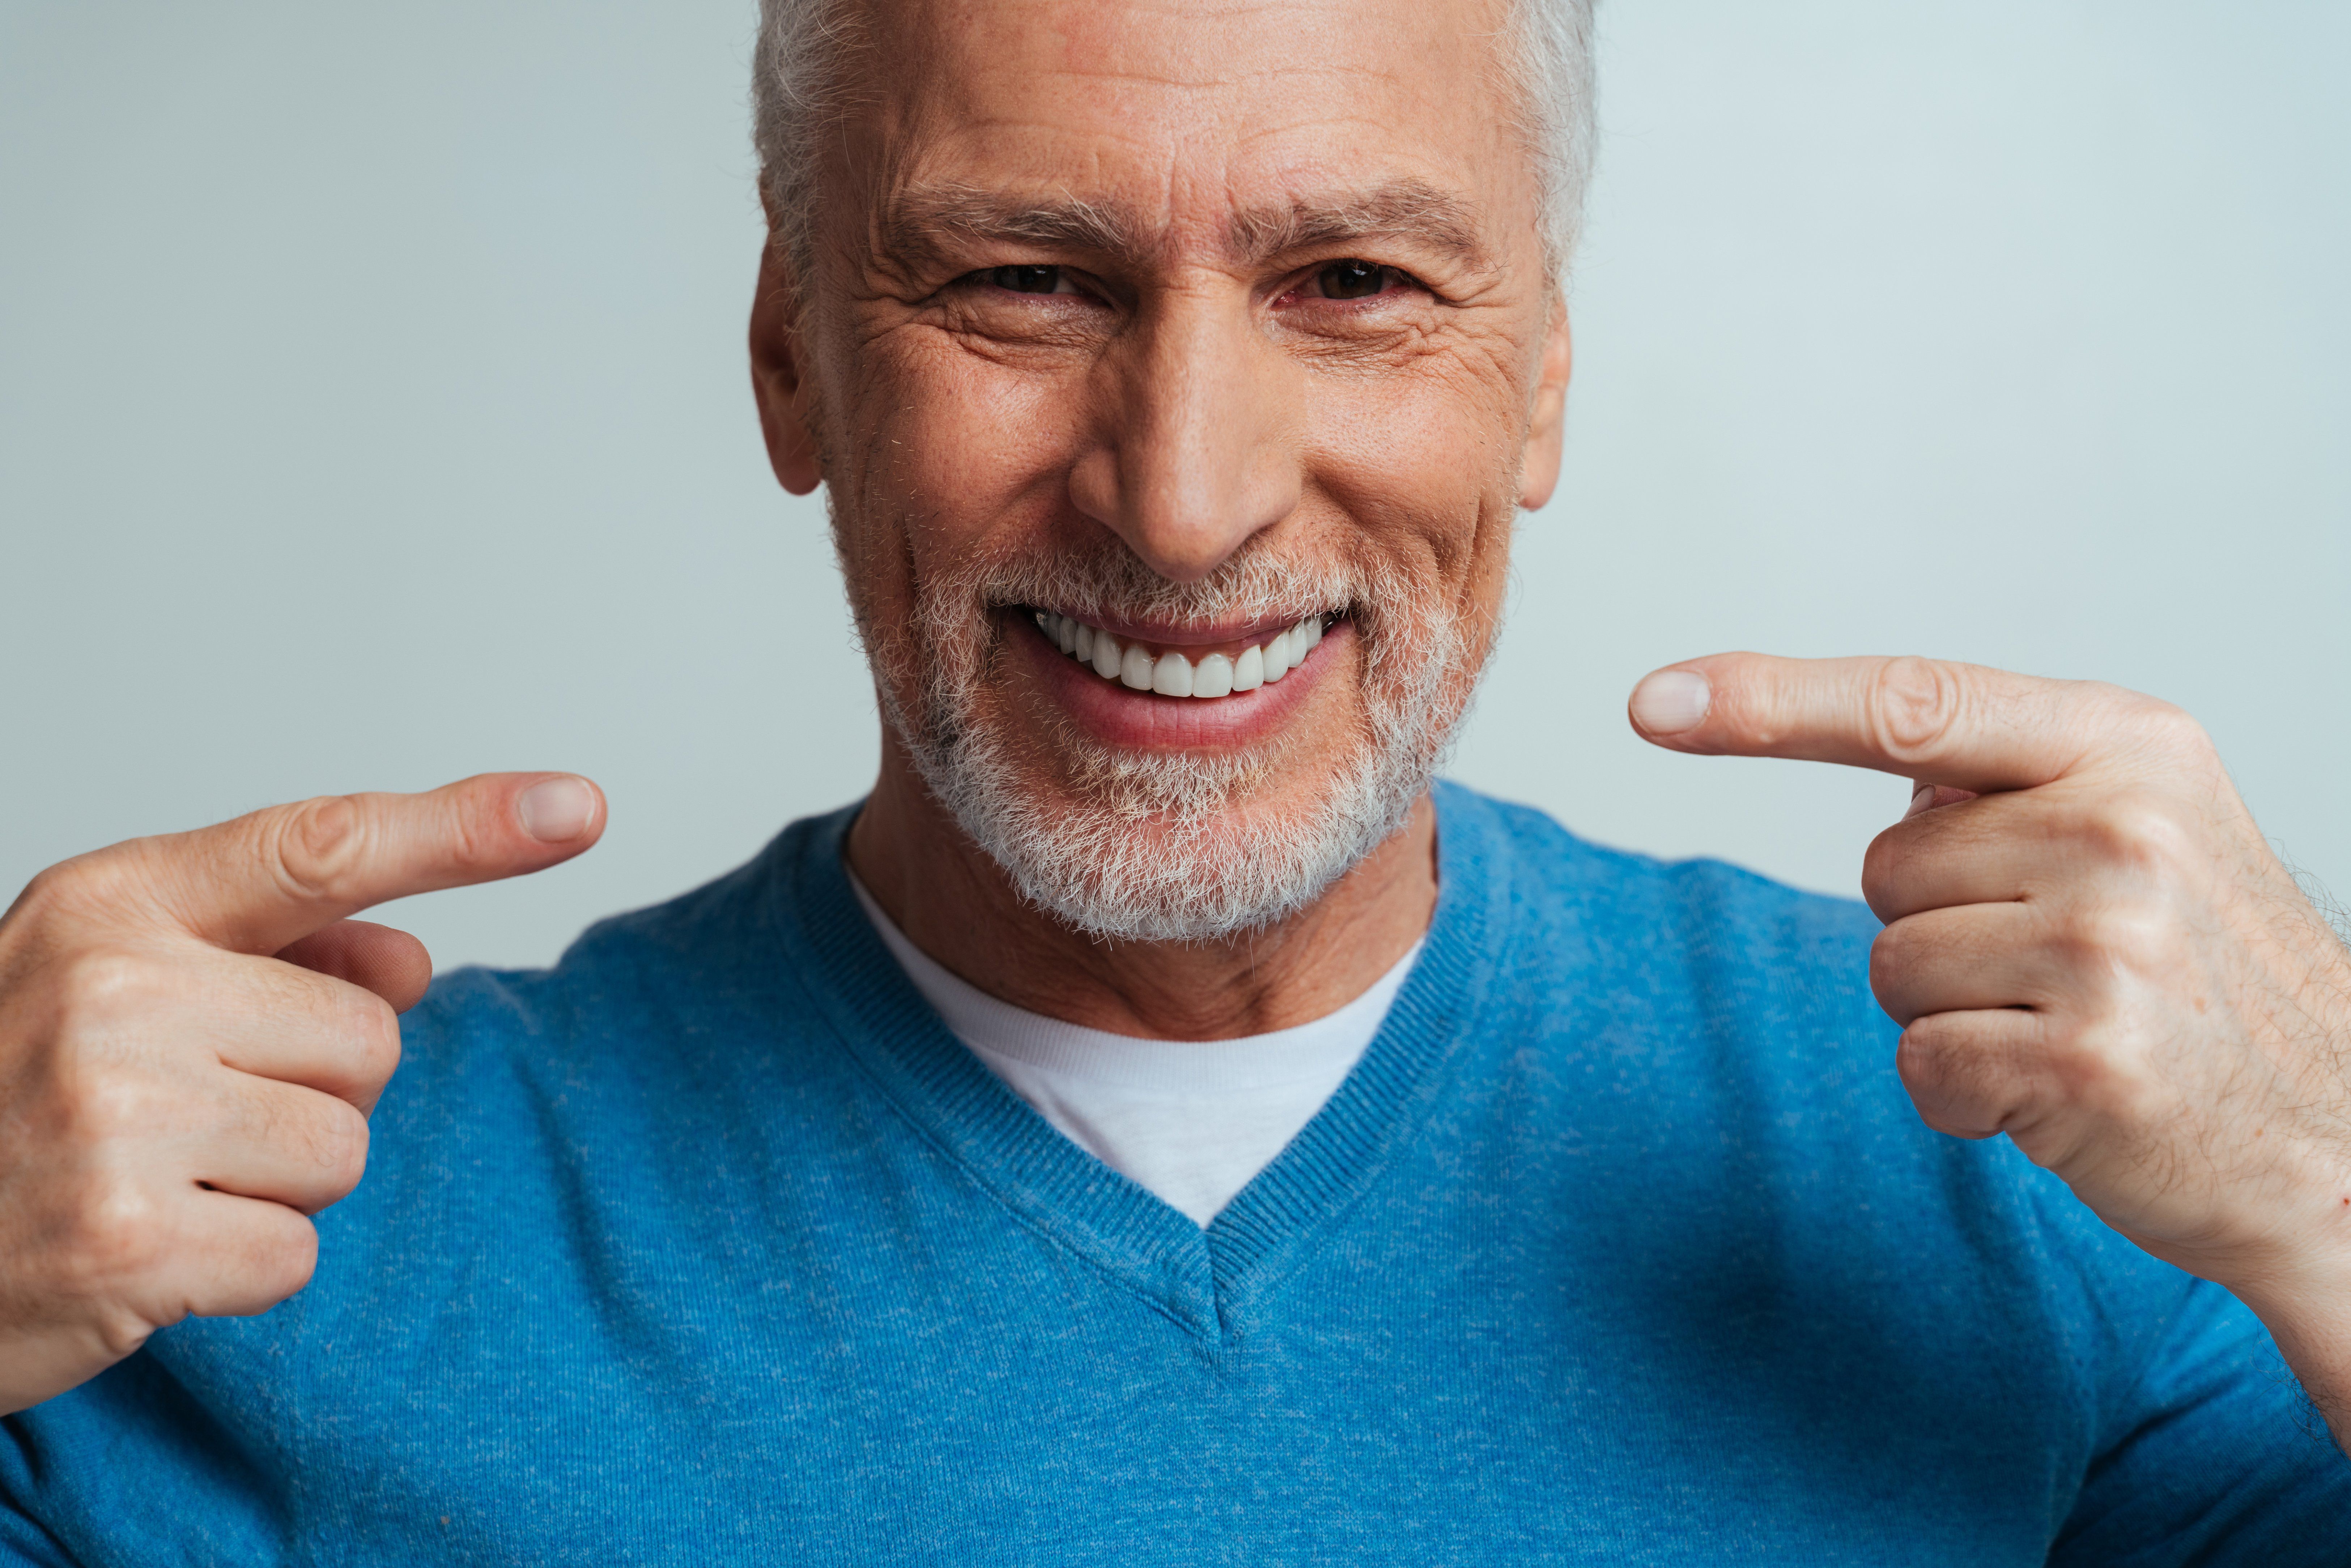 Denture Care and Maintenance Tips